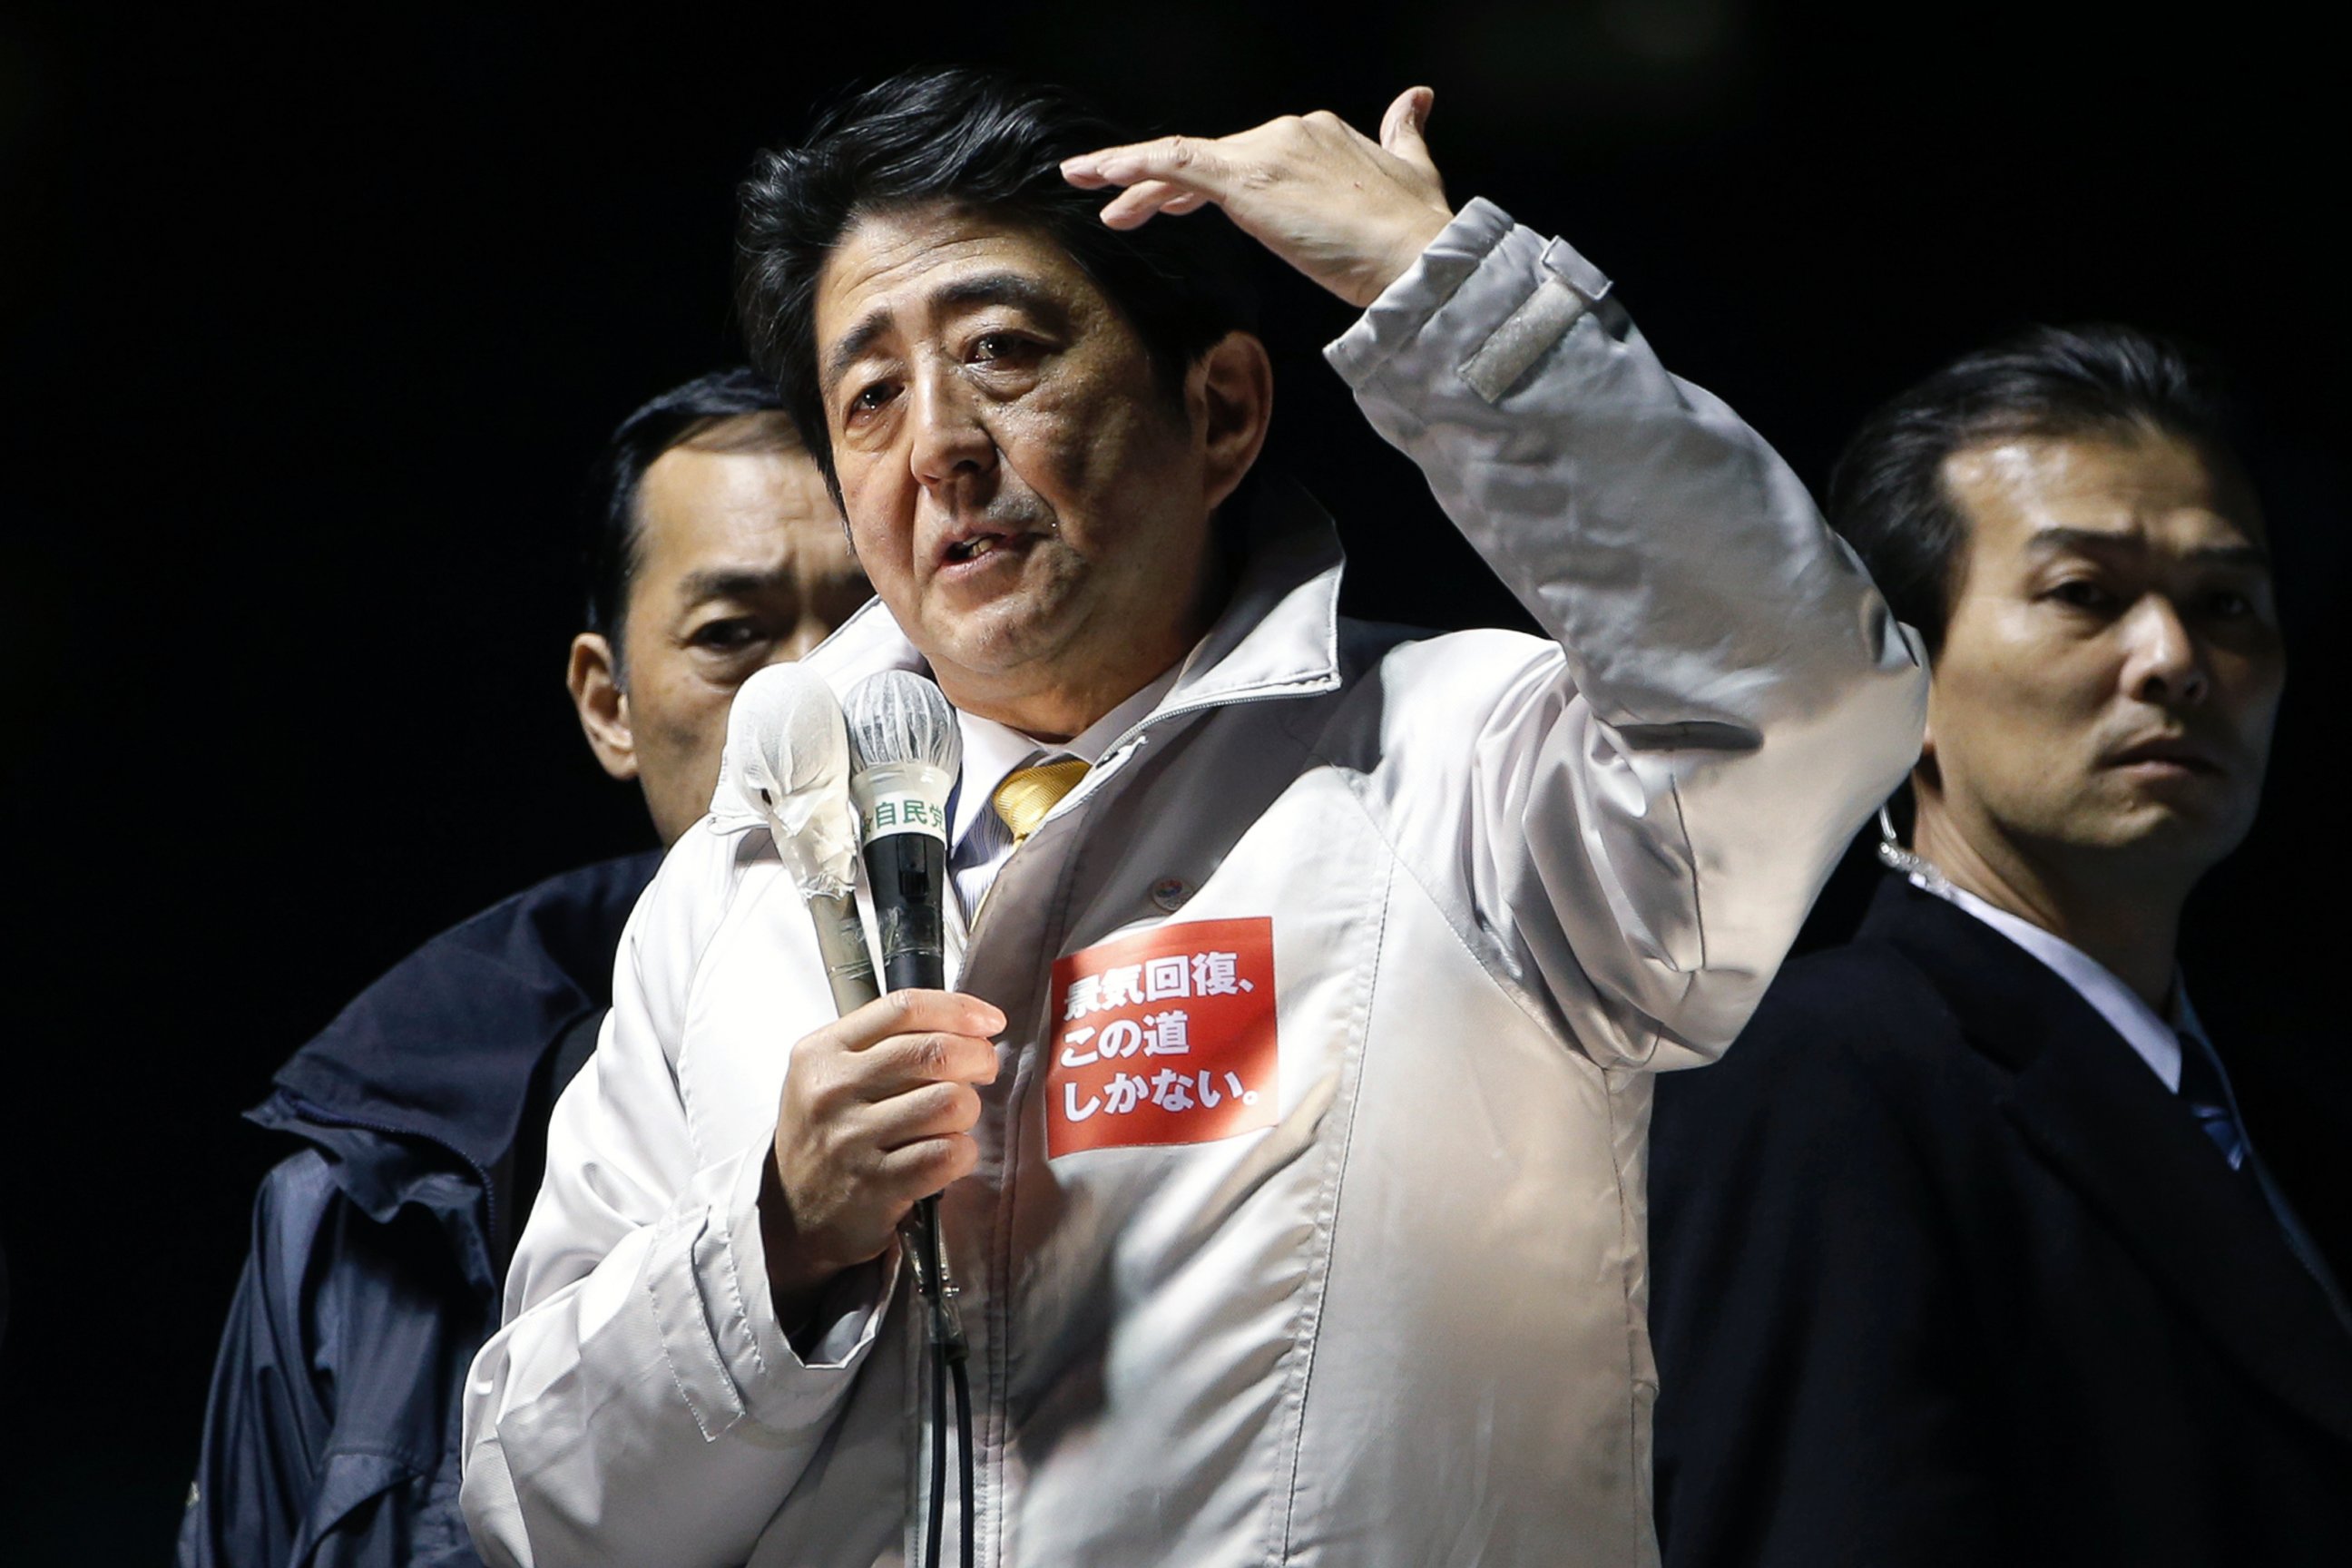 PHOTO: Shinzo Abe, Japan's prime minister and president of the Liberal Democratic Party (LDP), gestures as he speaks during an election campaign rally in Saitama City, Japan, Dec. 12, 2014.